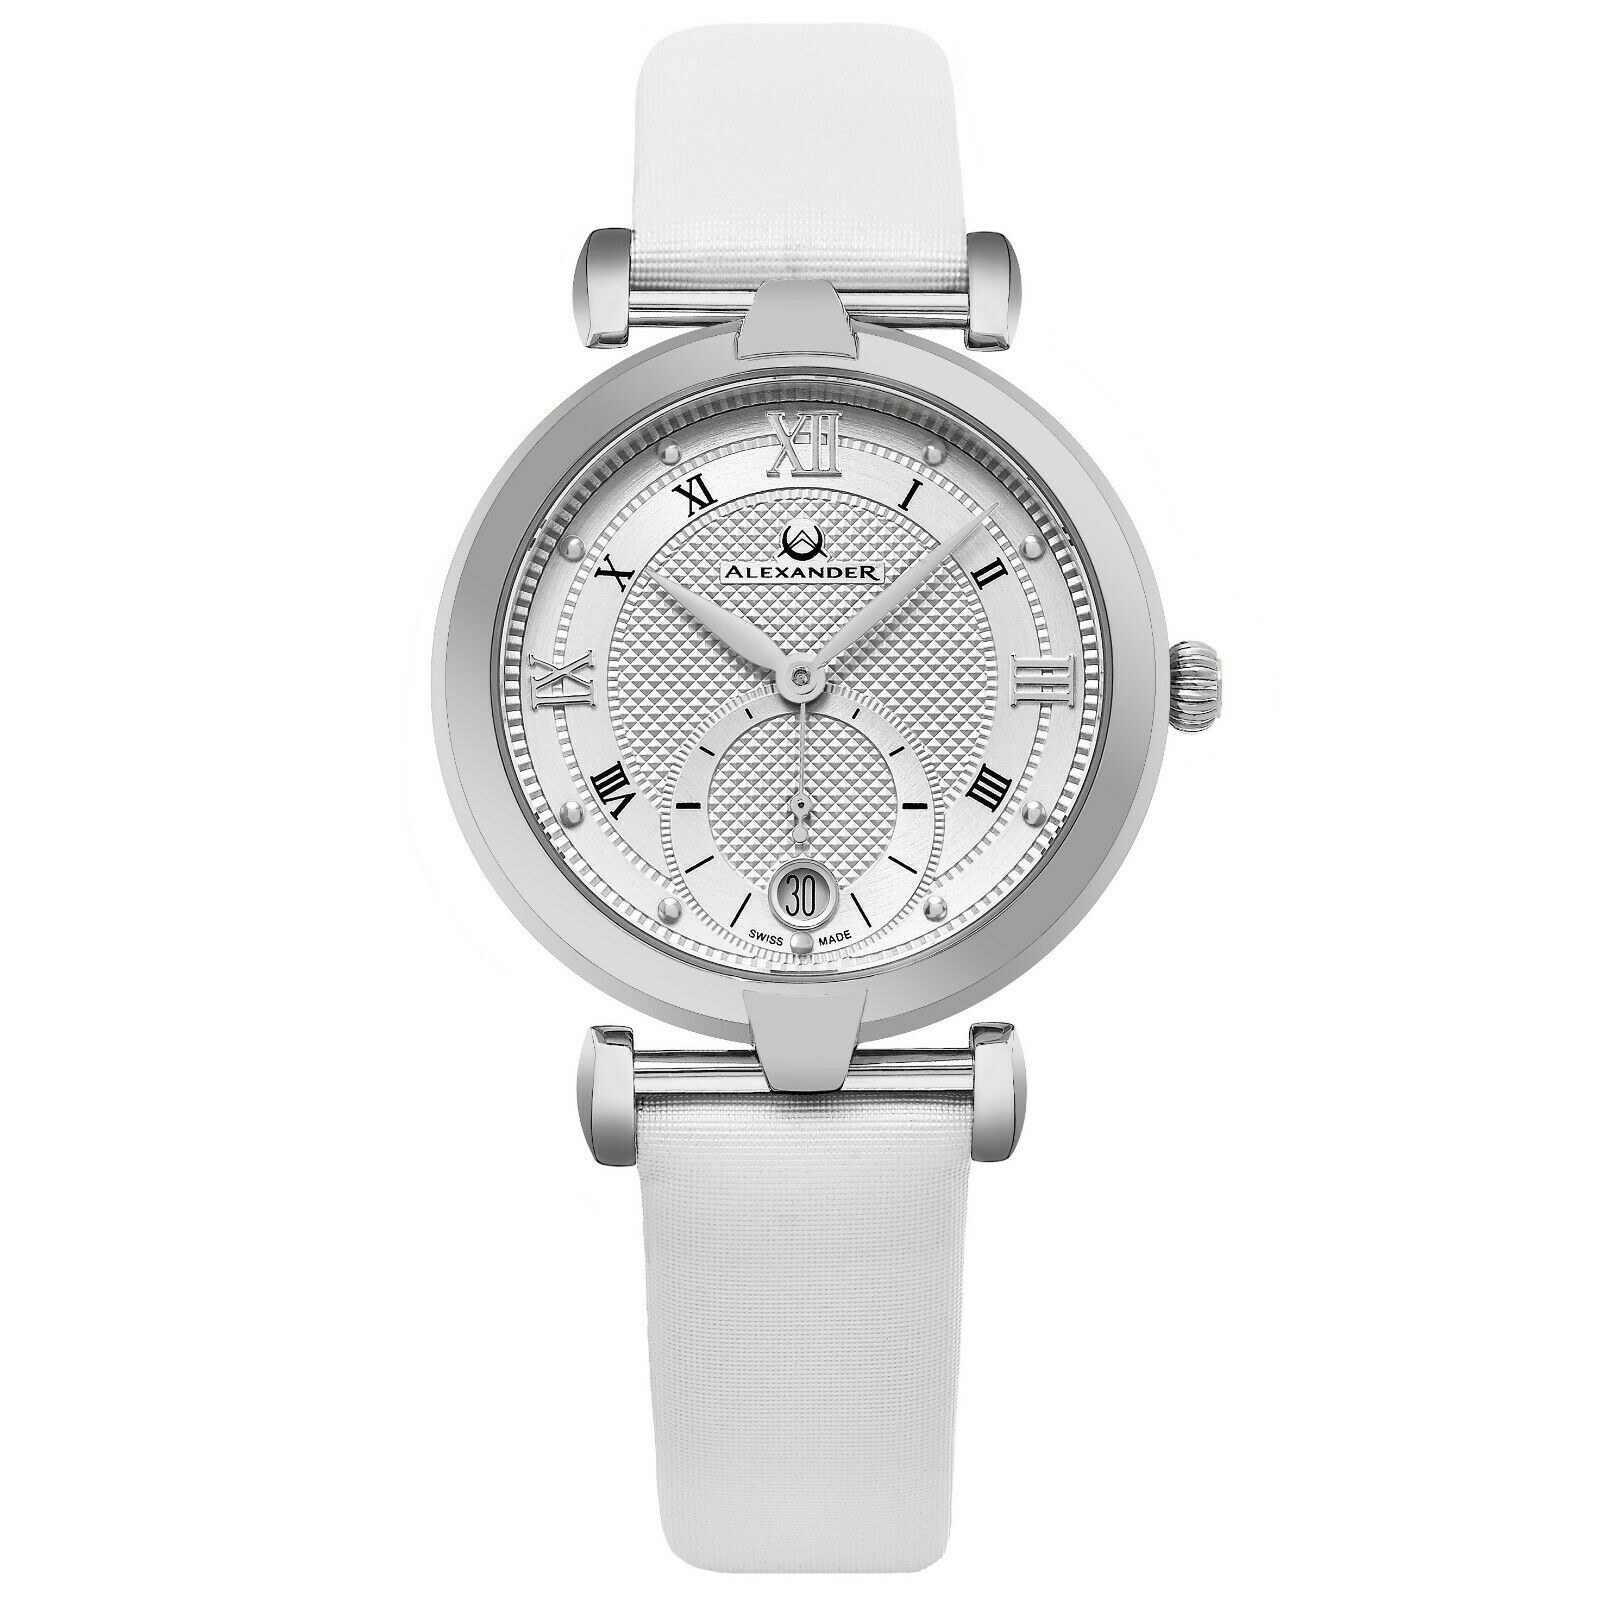 Đồng hồ Nữ Alexander Swiss Made Ladies Watch Stainless Steel White Satin Strap Silver Dial